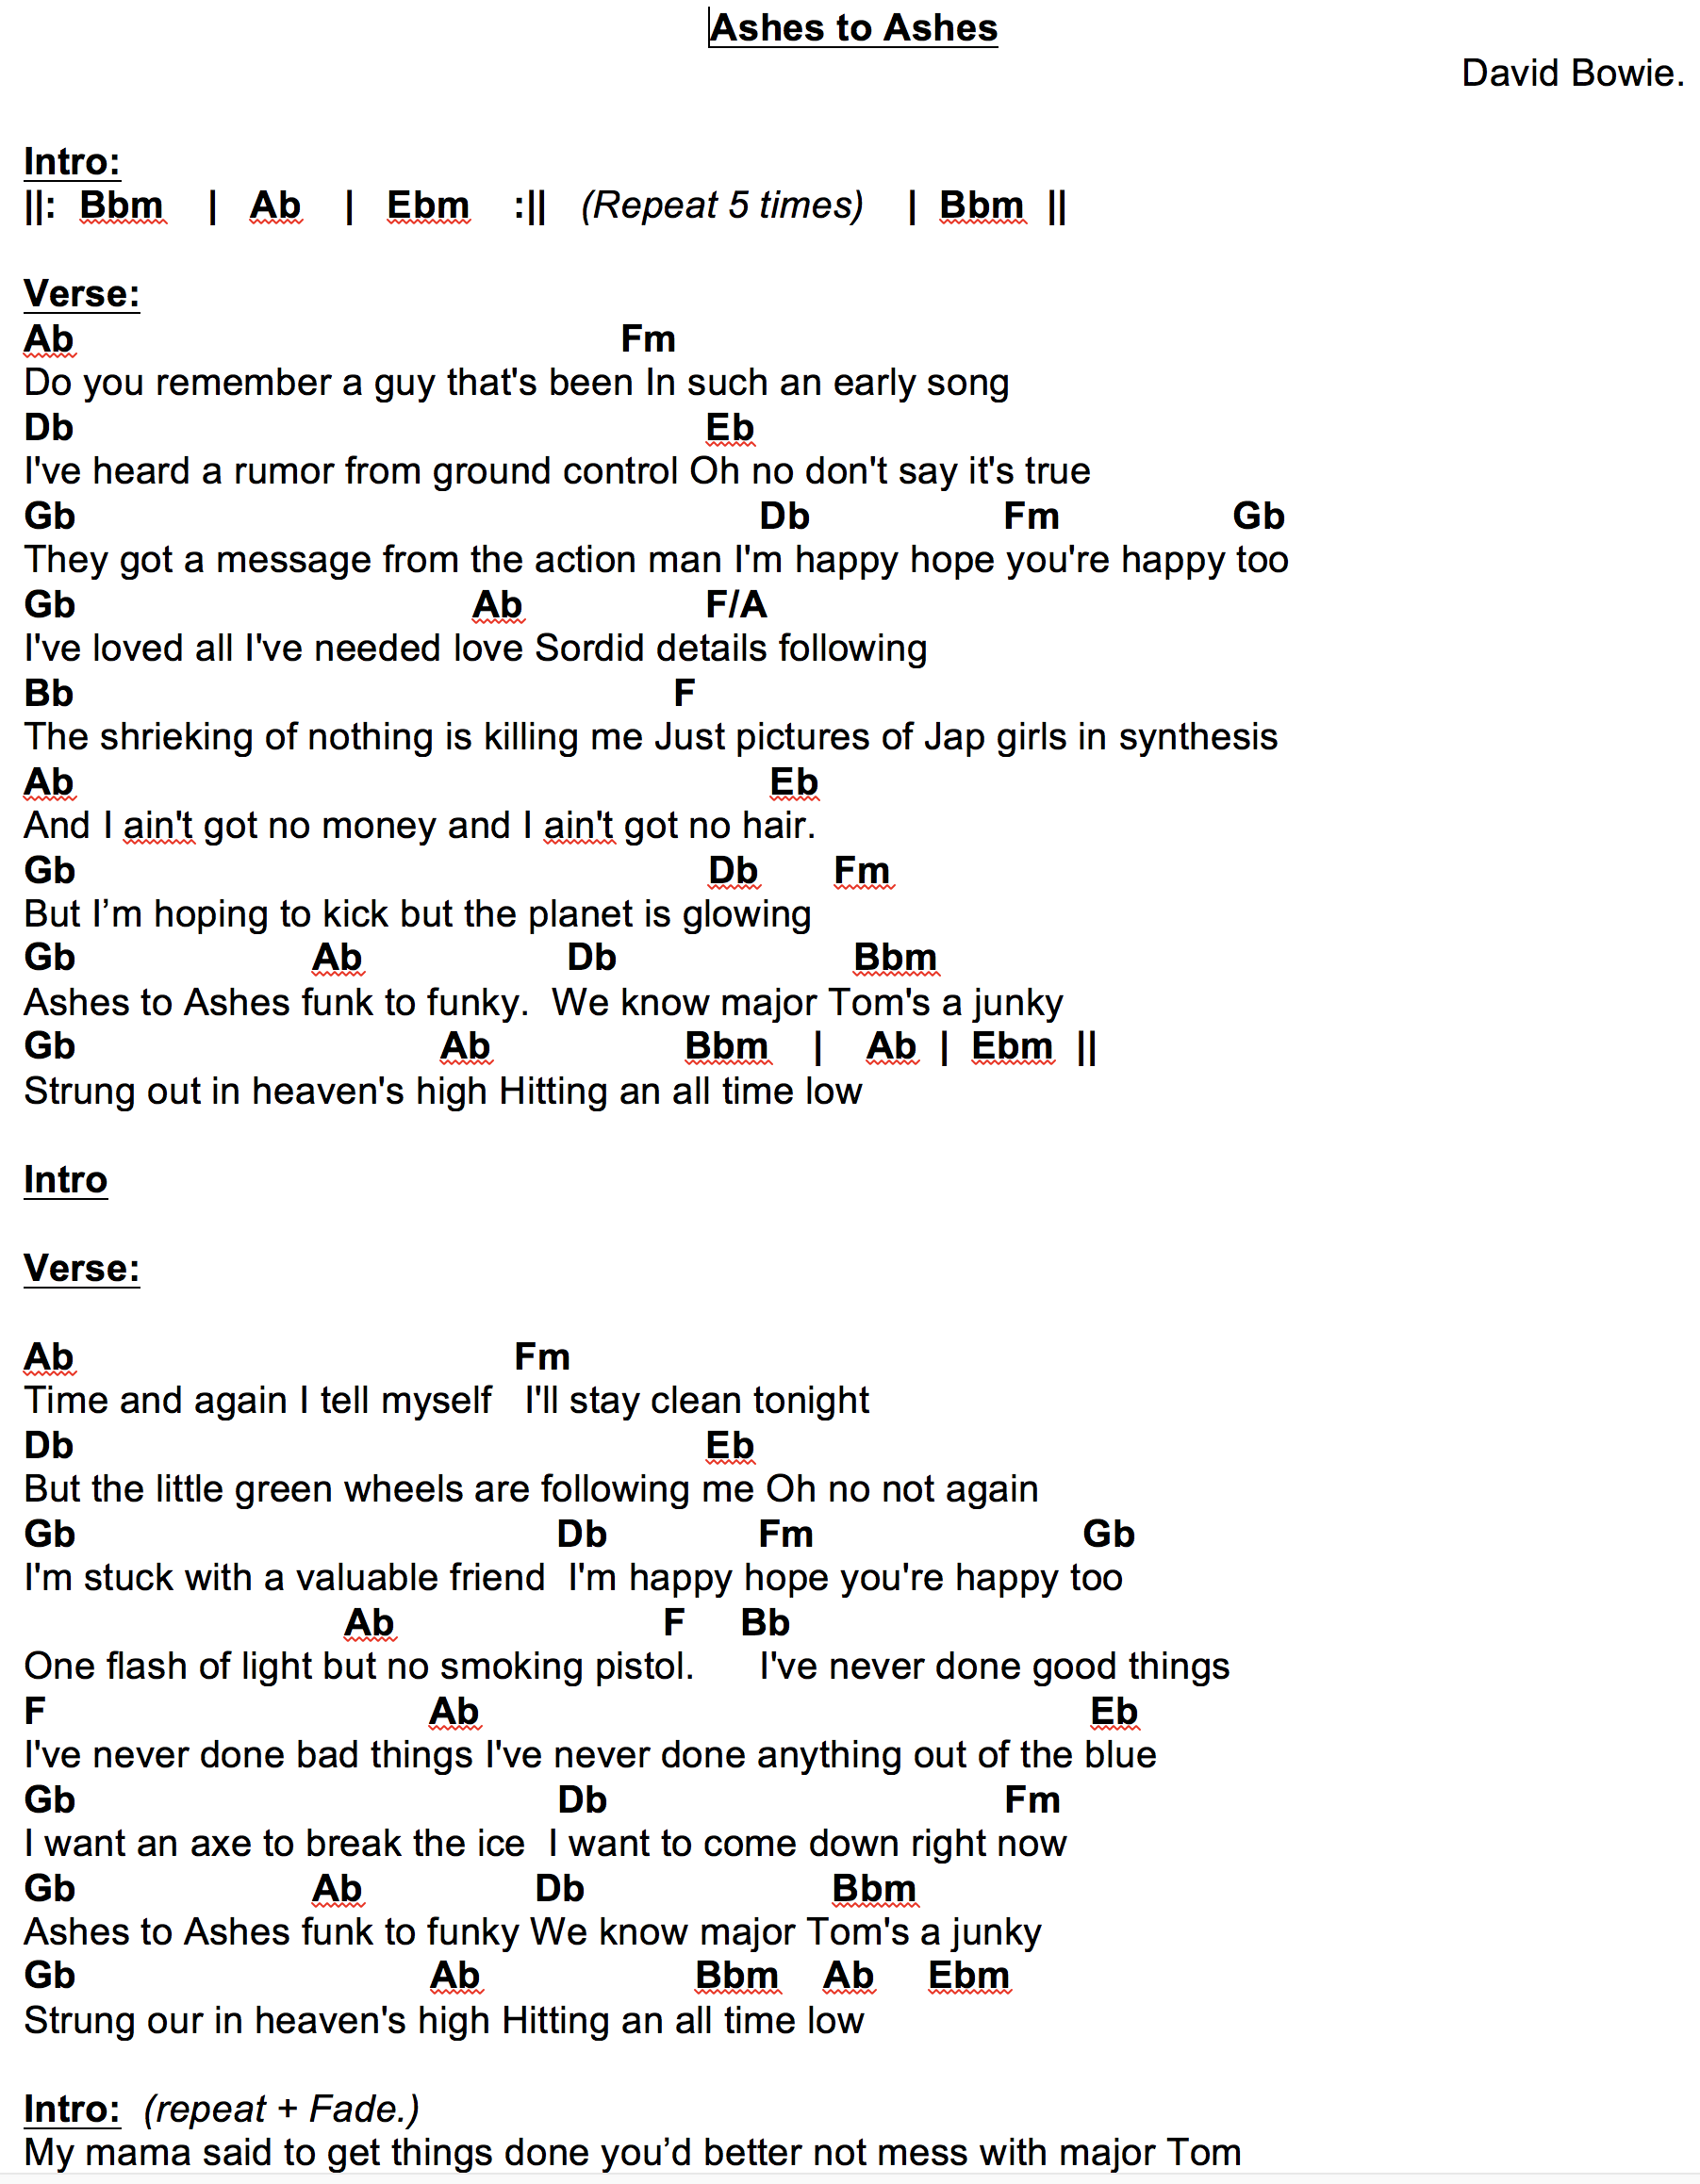 Lyrics and chords for David Bowie's Ashes to Ashes